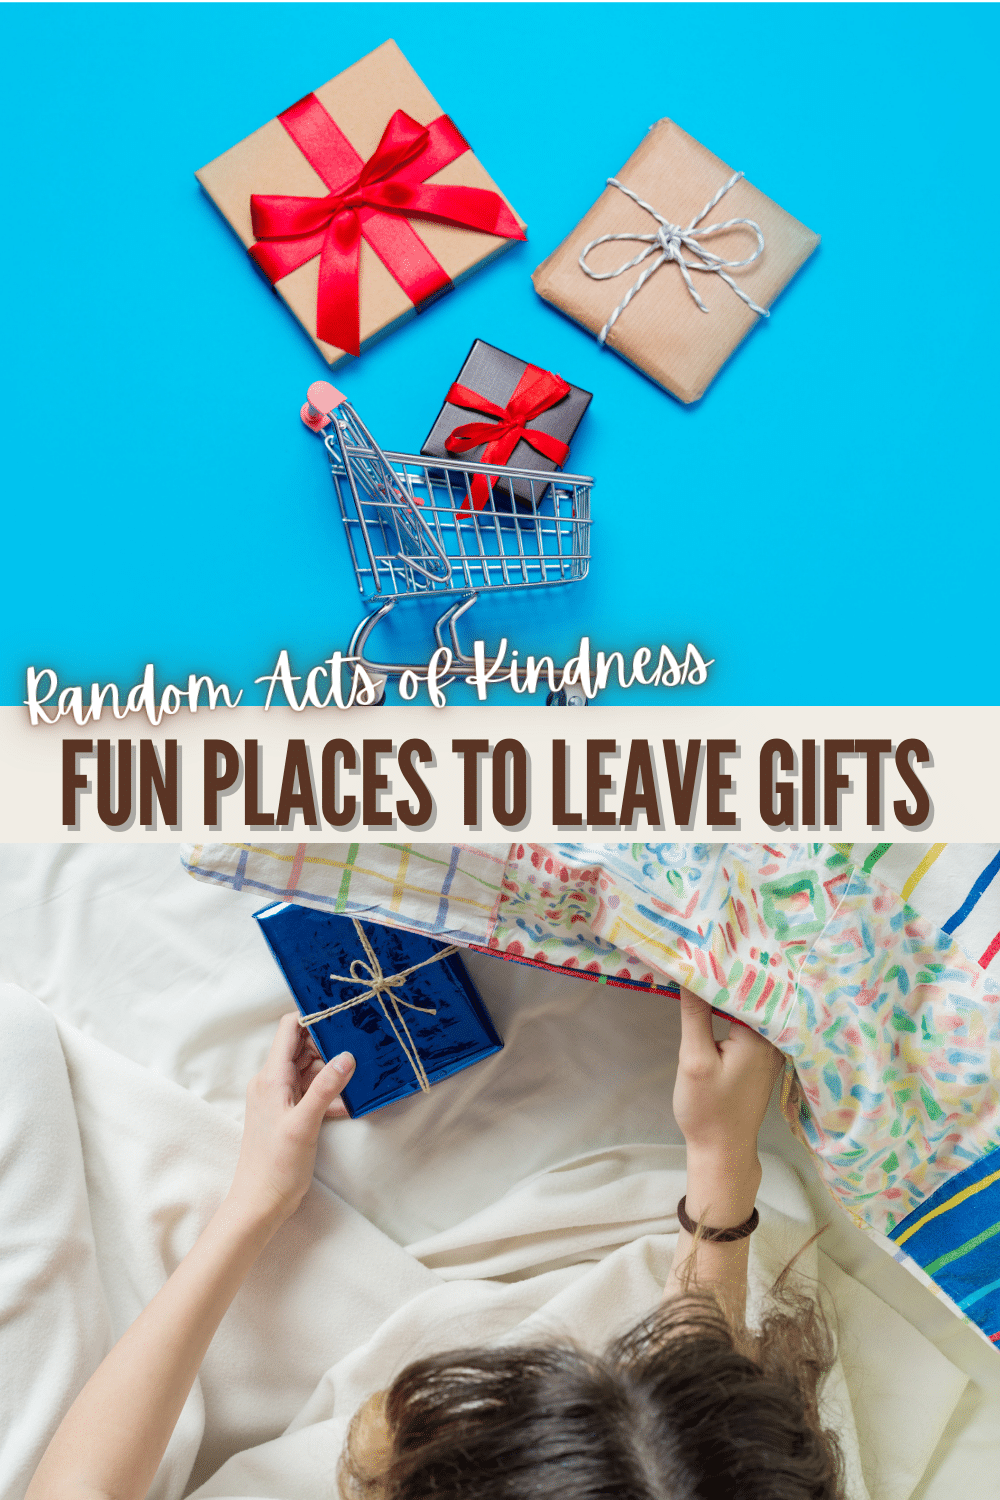 39 places where you can leave random acts of kindness gifts like friendly notes or spare change to brighten someone's day. #randomactsofkindness #kindness via @wondermomwannab